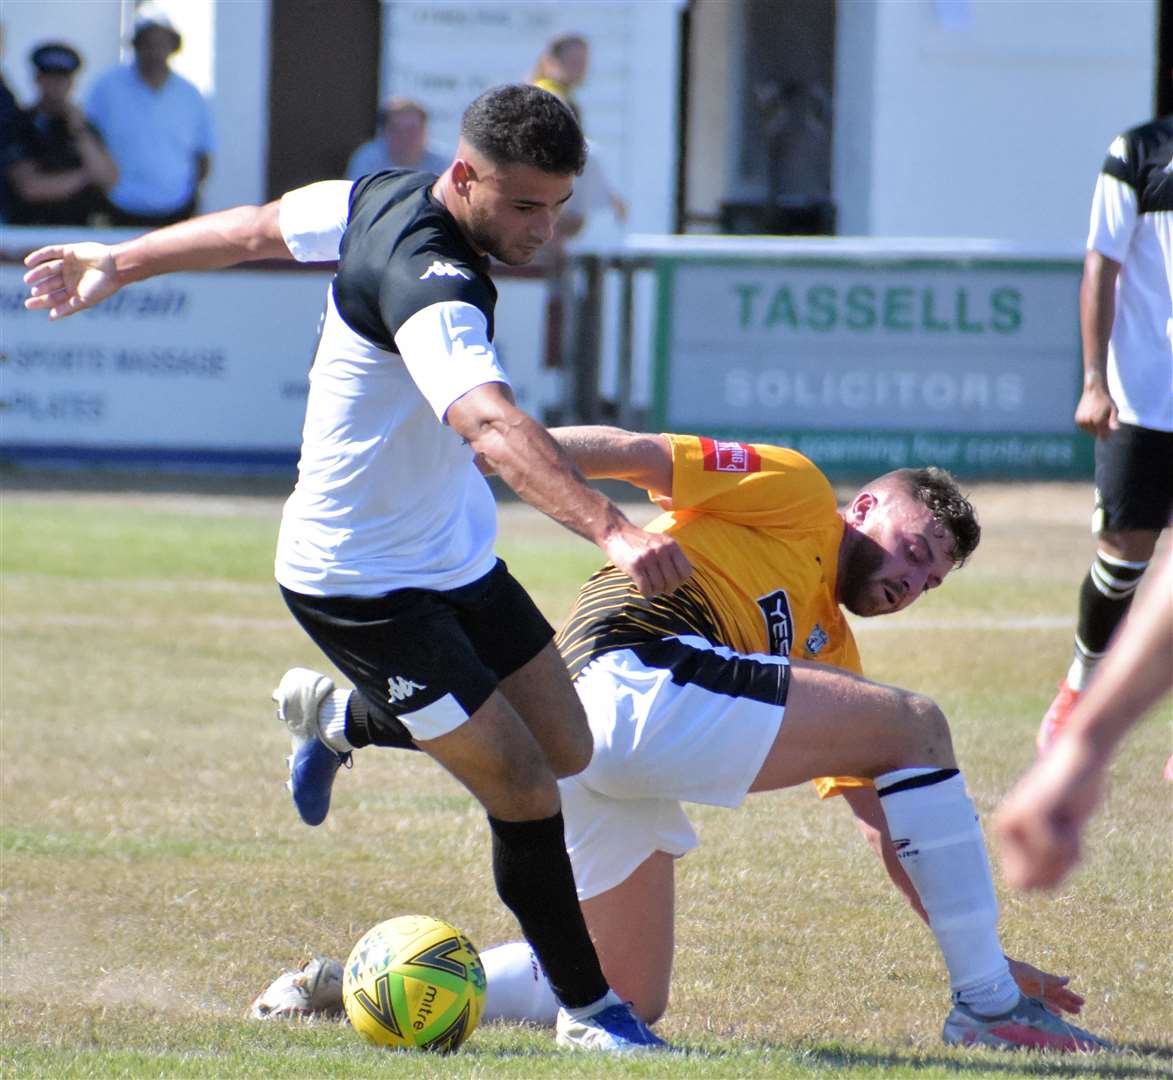 Bradley Schafer tussles for the ball at Salters Lane. Picture: Randolph File